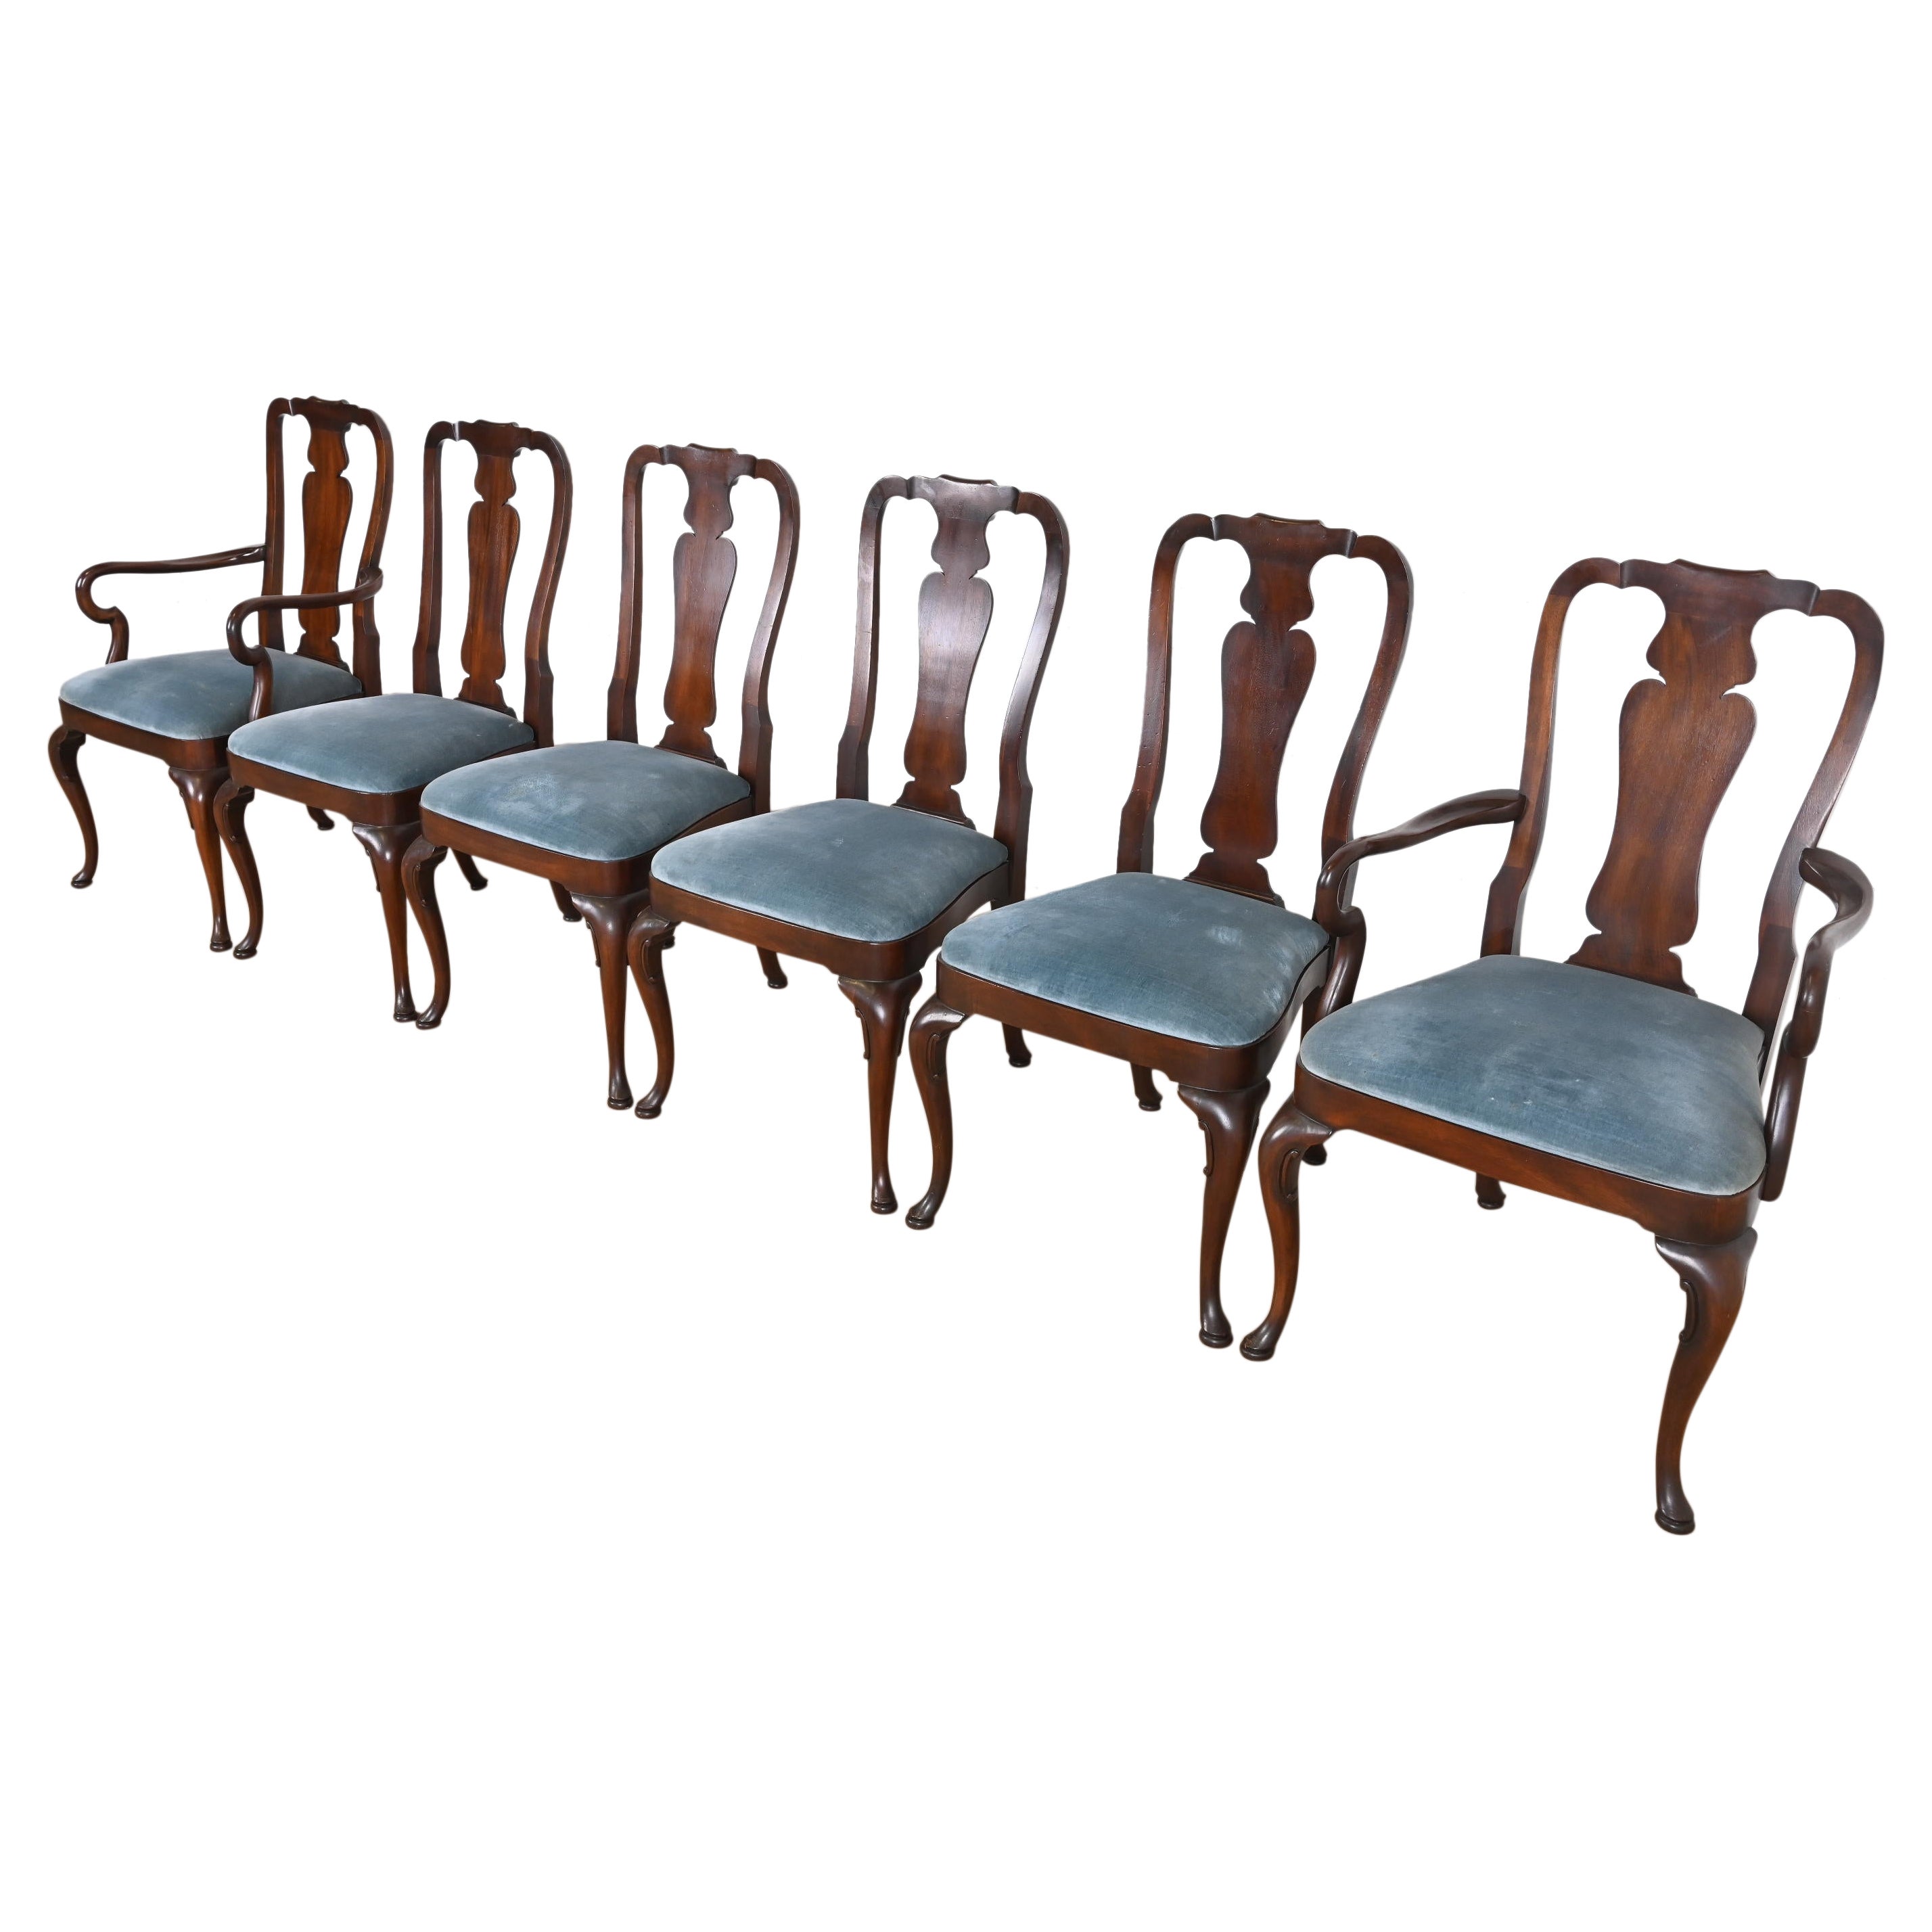 Kindel Furniture Queen Anne Mahogany Dining Chairs, Set of Six